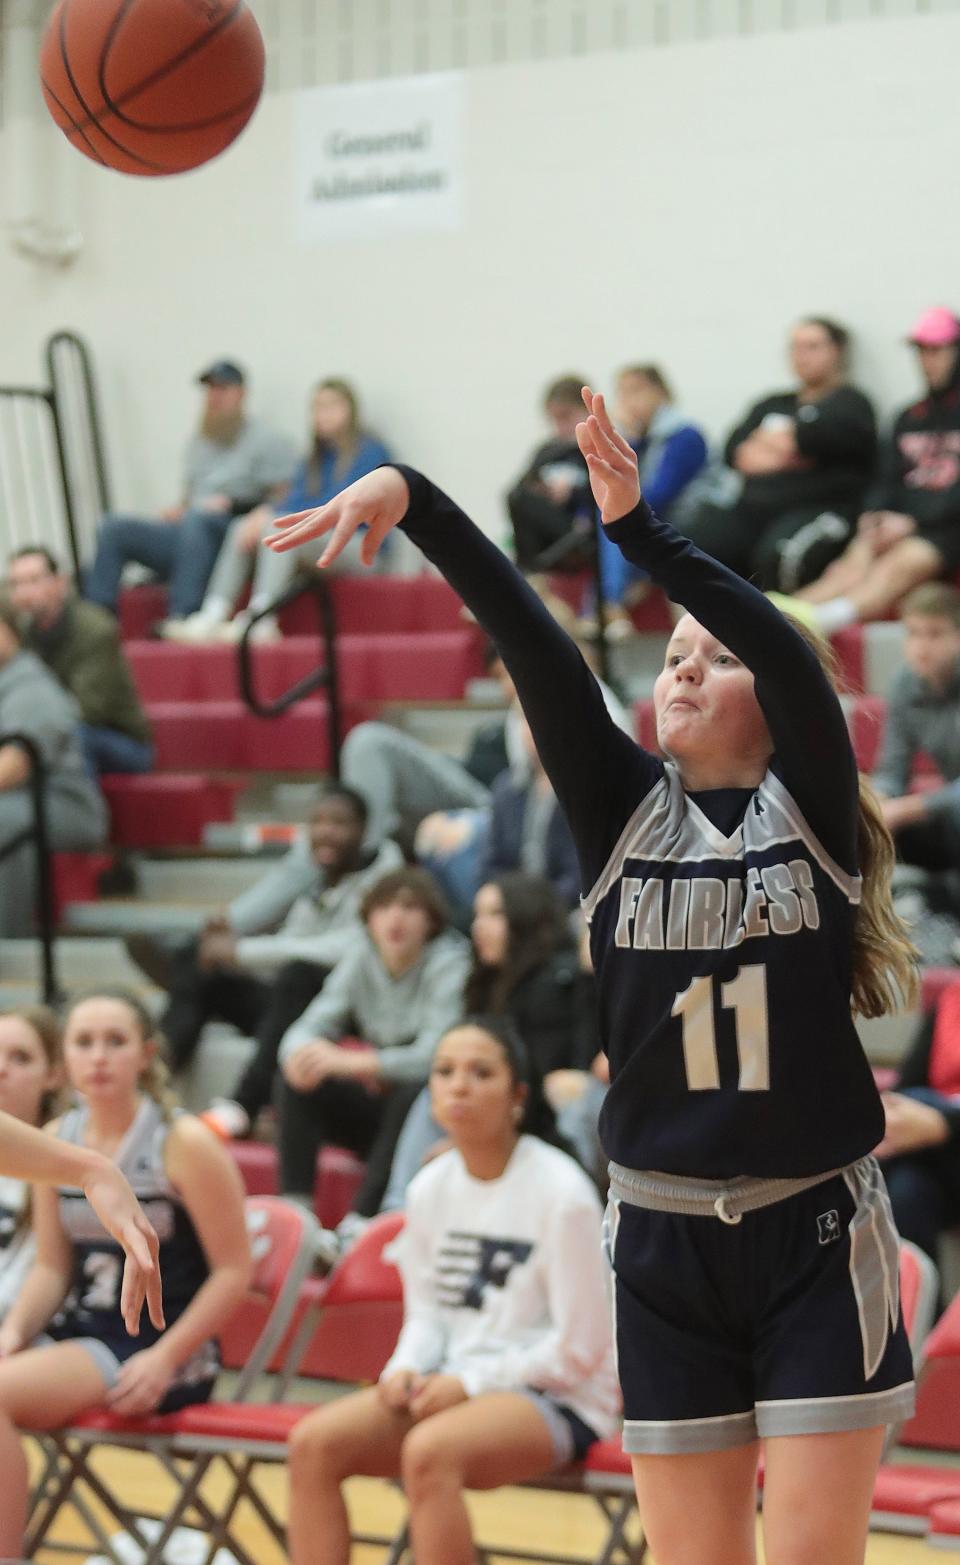 Fairless' Zoey Steele (11), shown here during a game last season, scored 10 points in Monday's win over Sandy Valley.